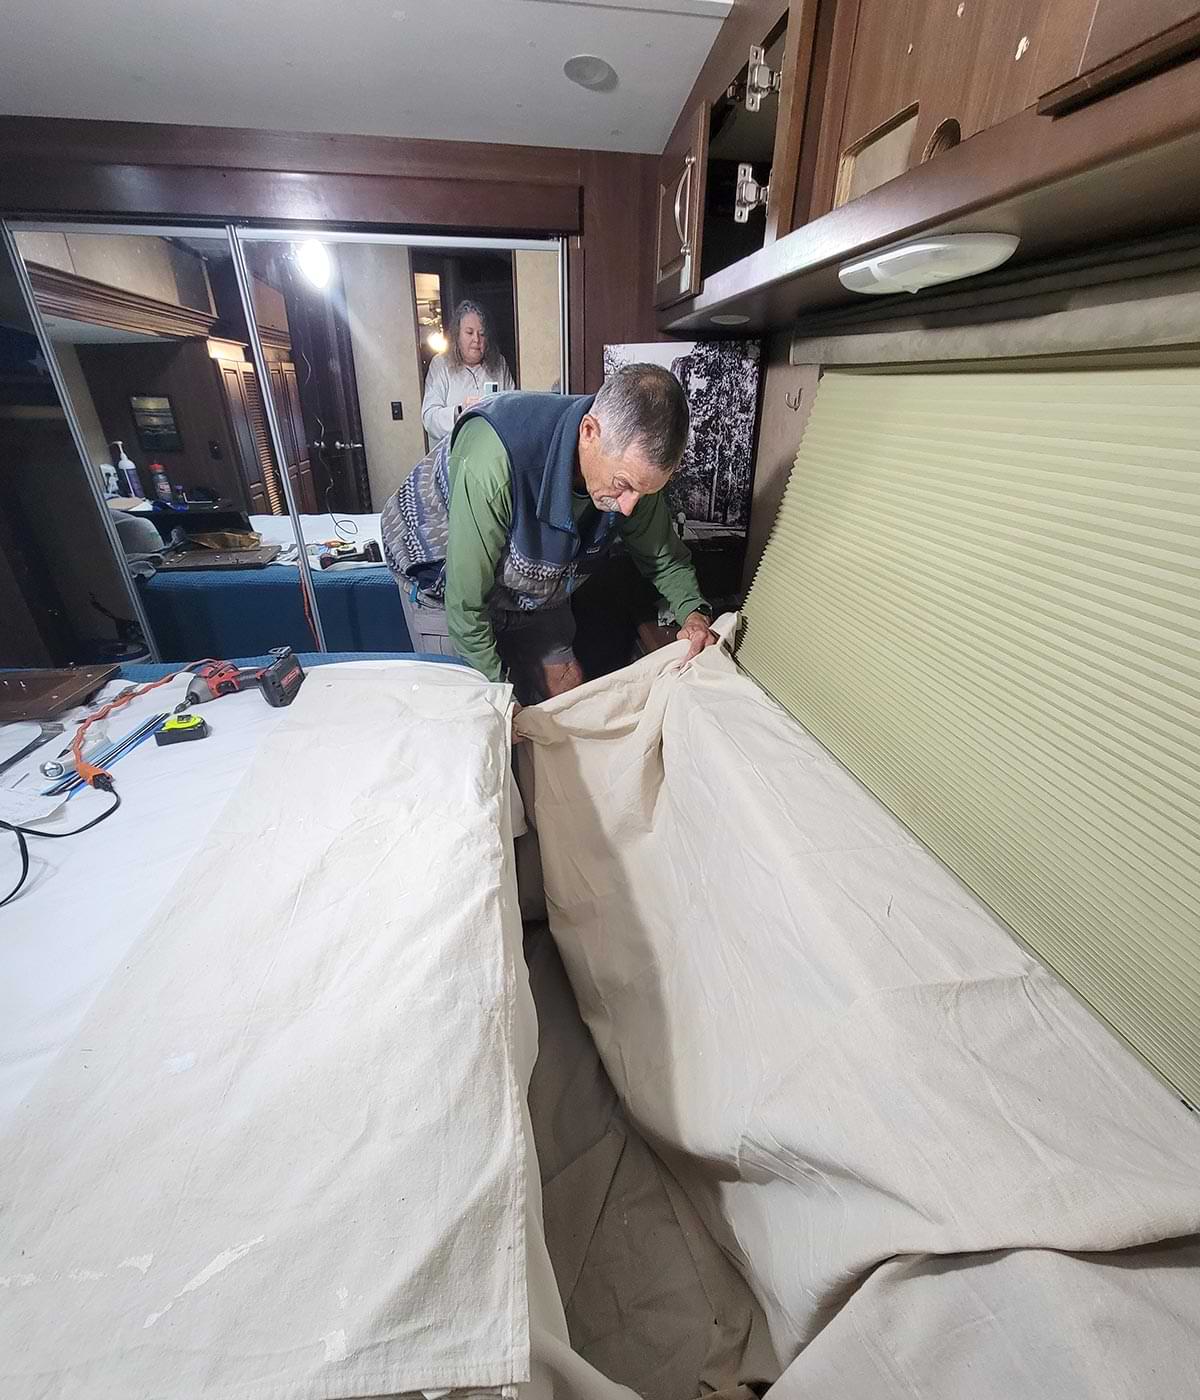 a man lays a painter's tarp on the floor under the intended work area